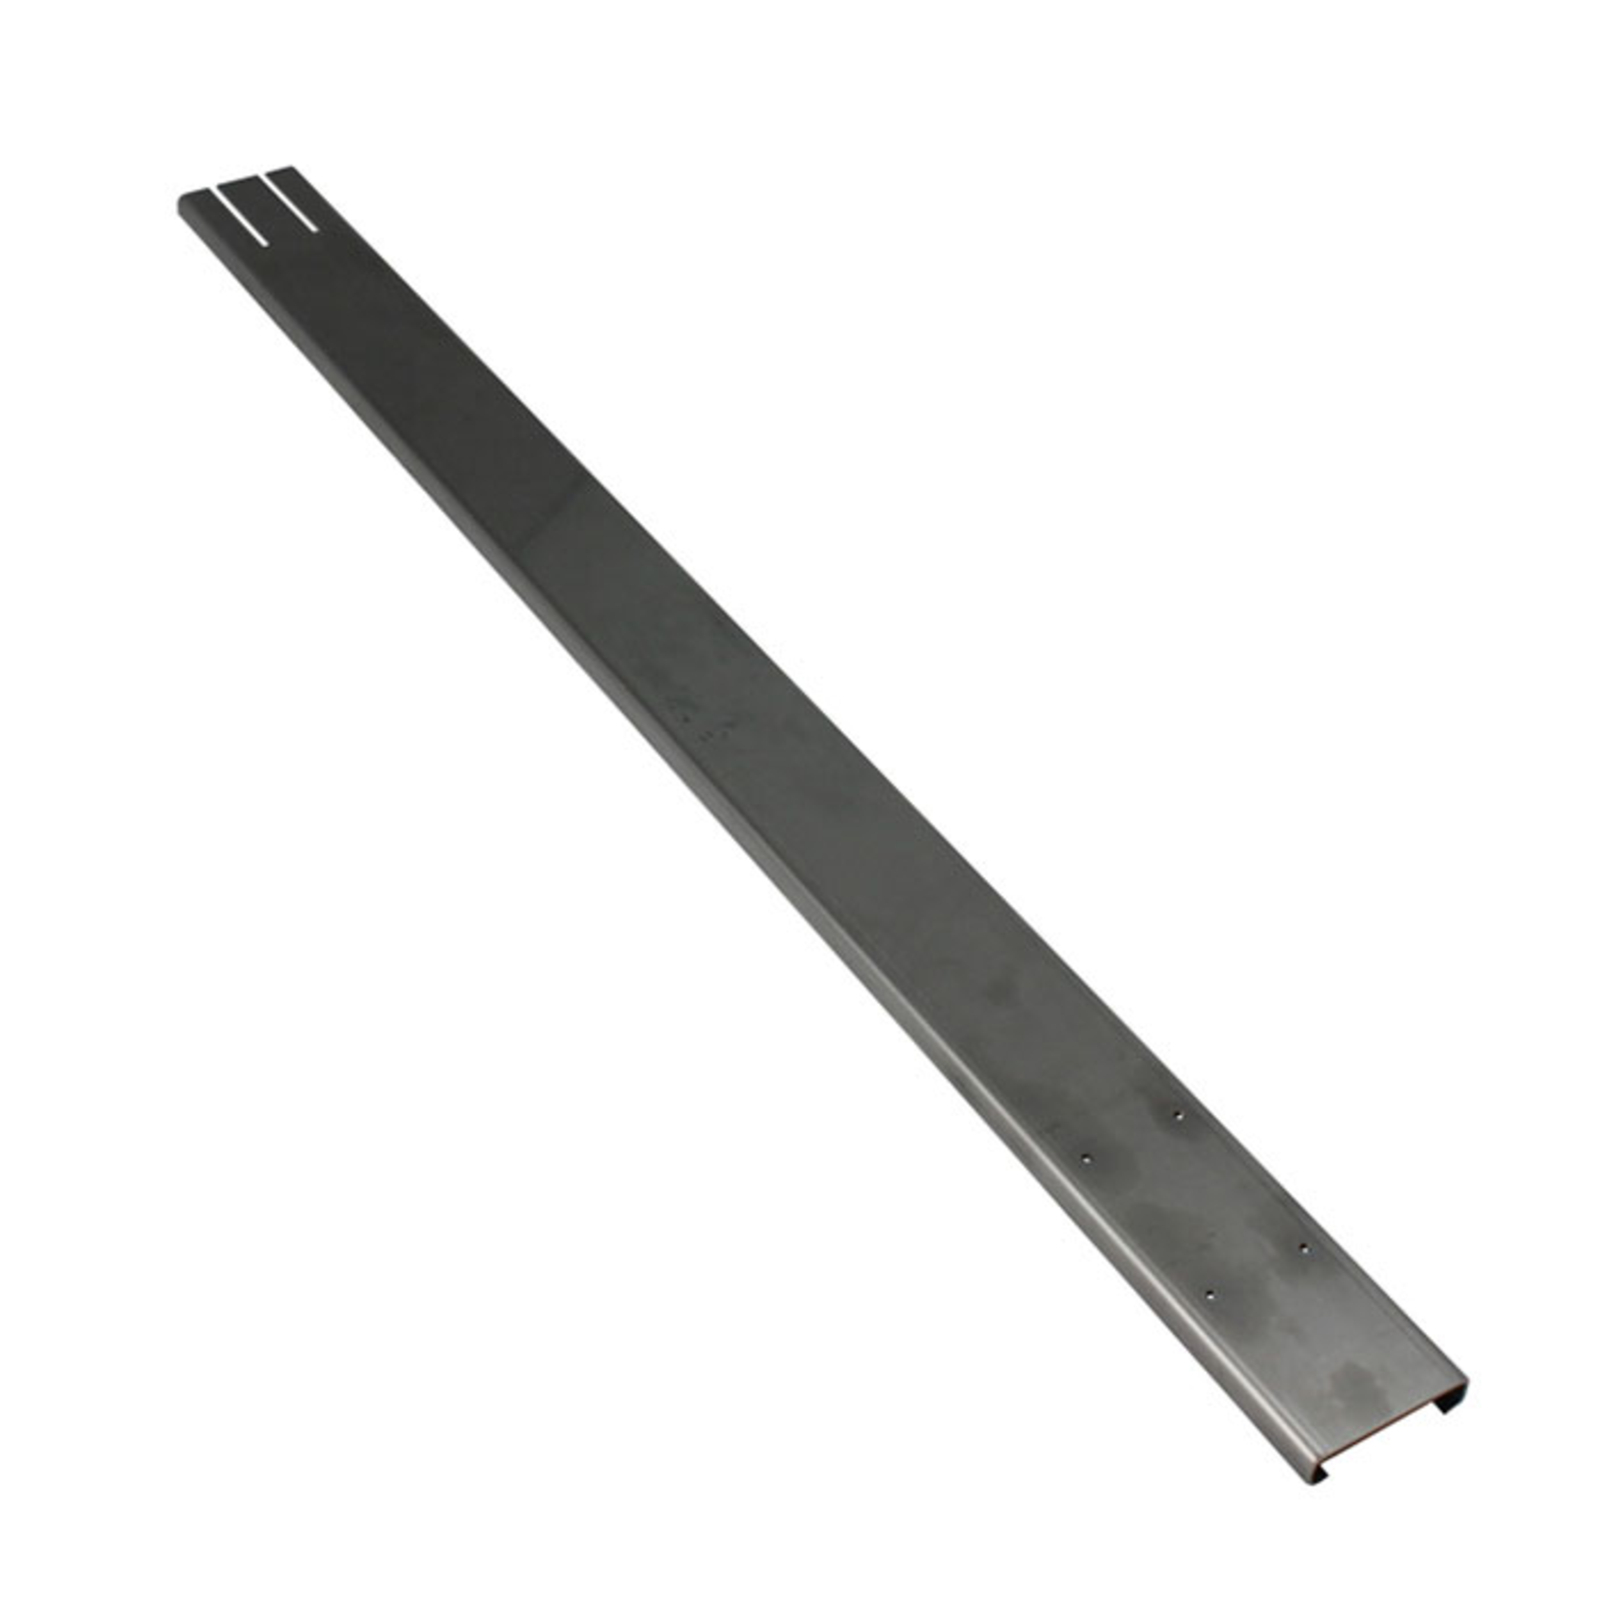 Ground anchor for the Puk Way luminaire series